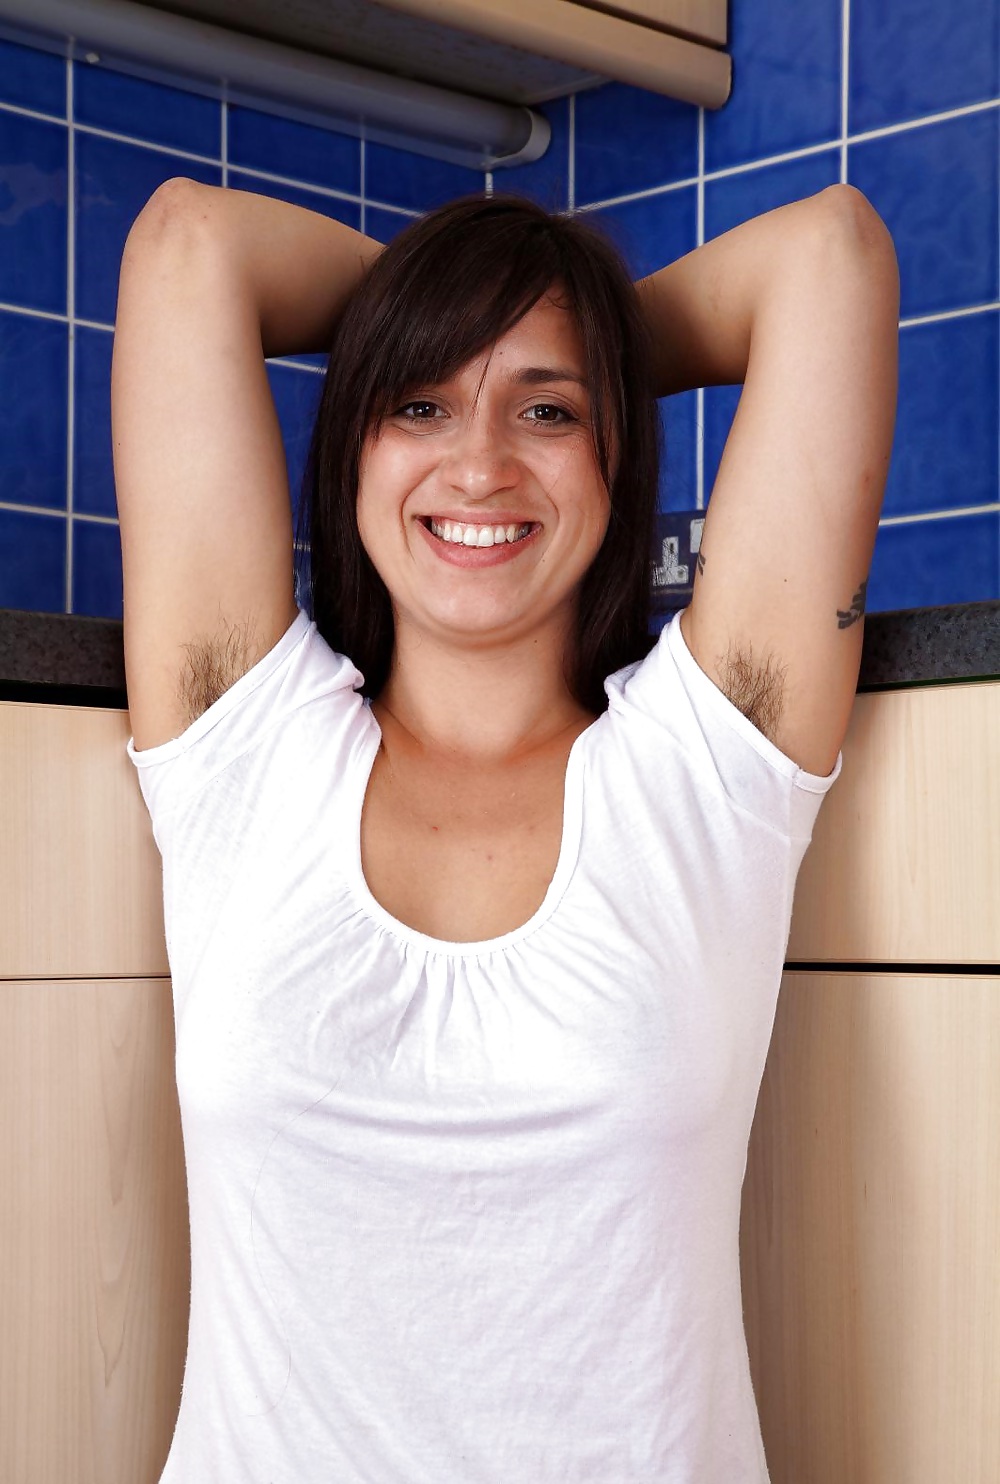 Miscellaneous girls showing hairy, unshaven armpits 2 #36246556